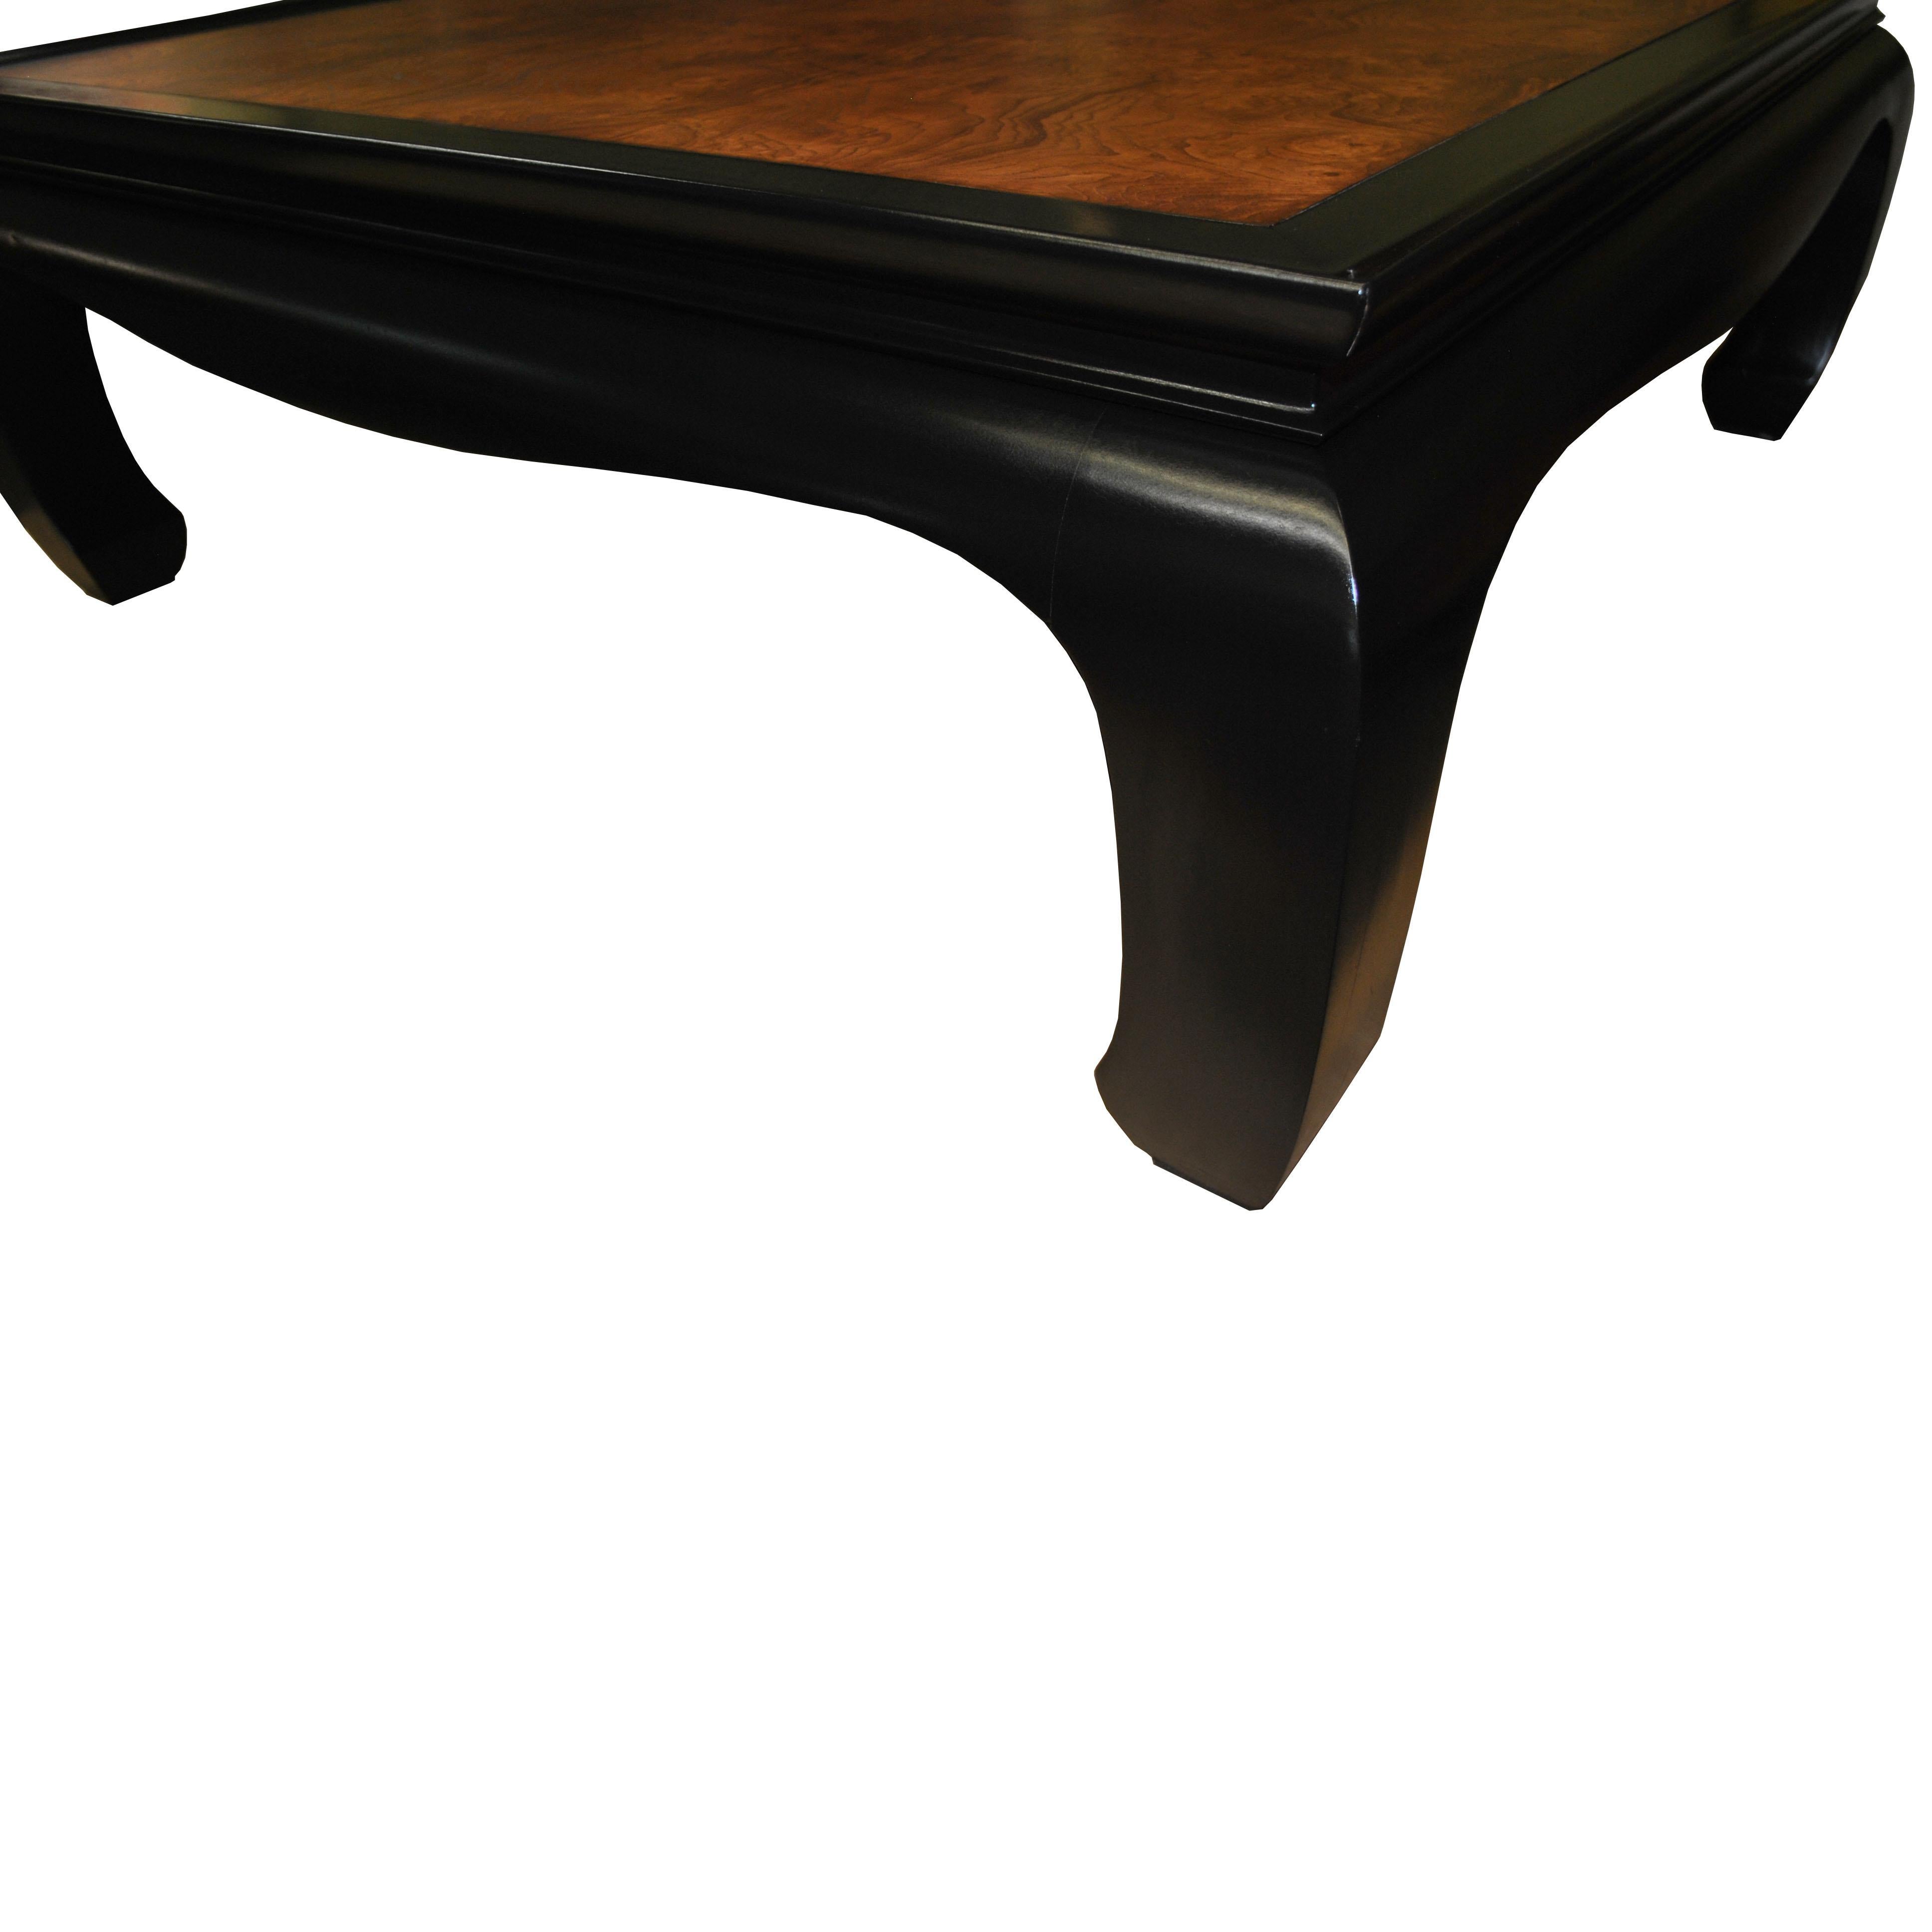 Chinoiserie Midcentury Chin Hua Burl Coffee Table by Century Furniture Co.